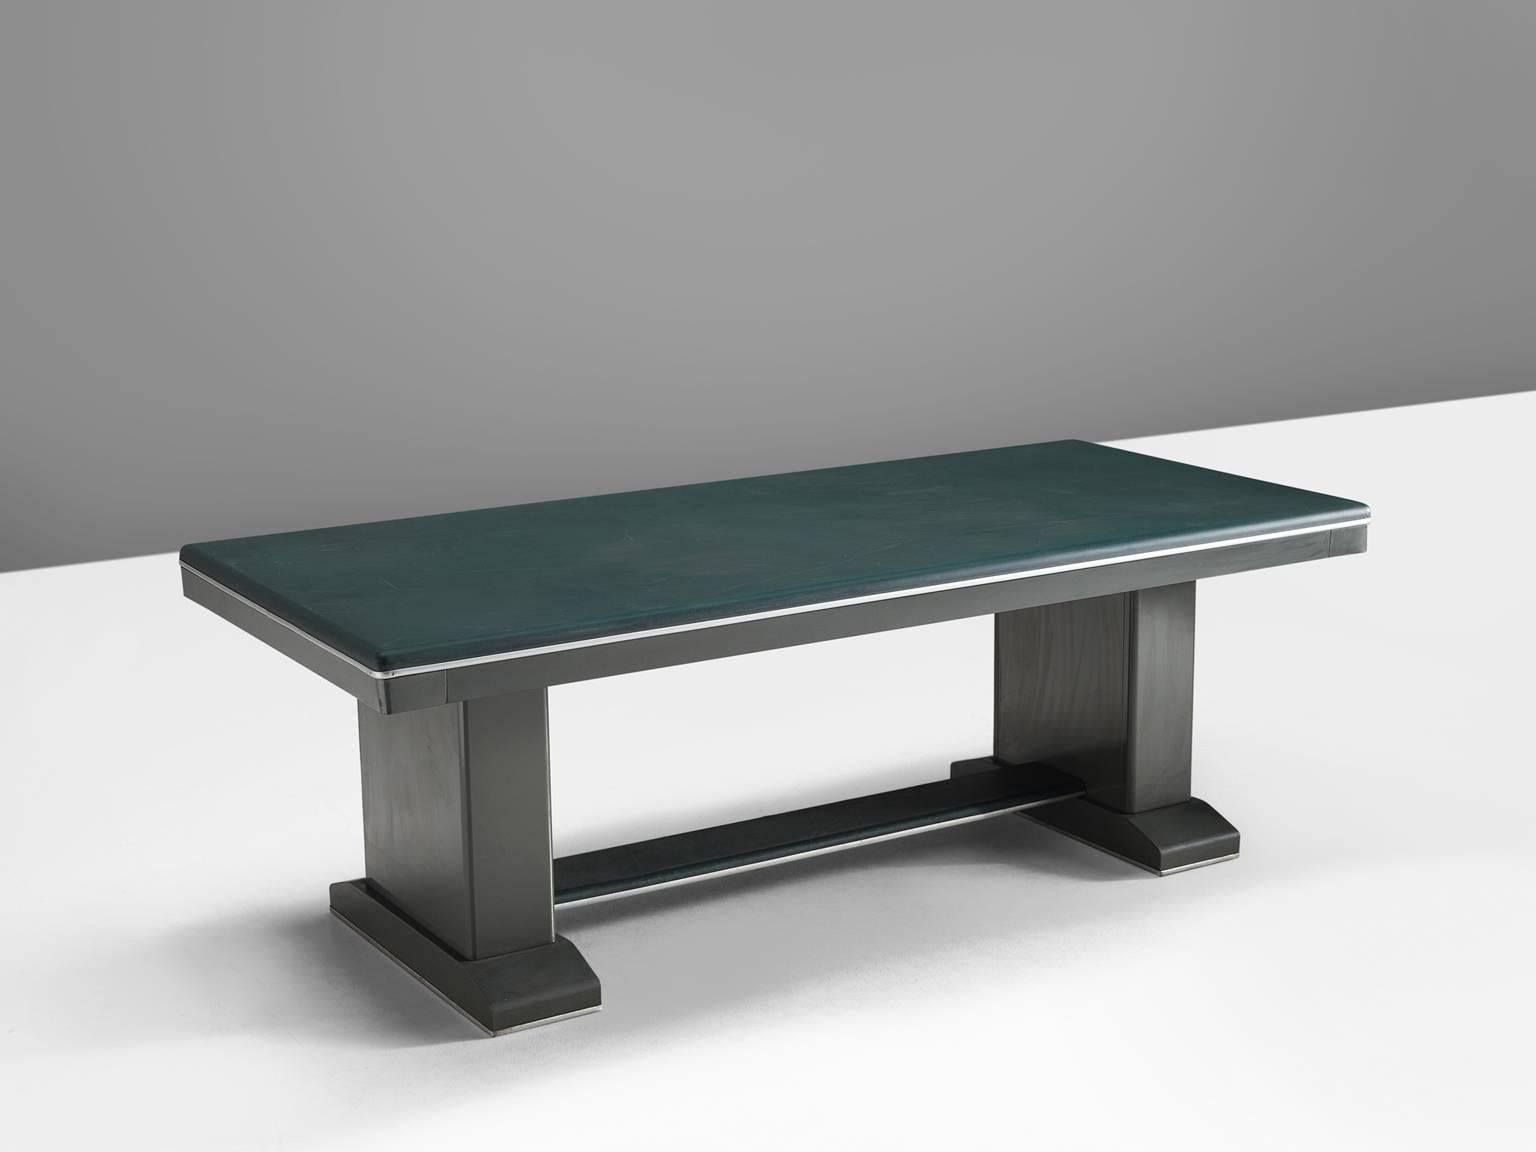 Dining table or writing table, coating, steel, Netherlands, 1980s..

This sturdy table features two this metal legs and a large, thick metal and green coated top. The metal base is brushed a wonderful sleek contrast with the warm, soft and deep